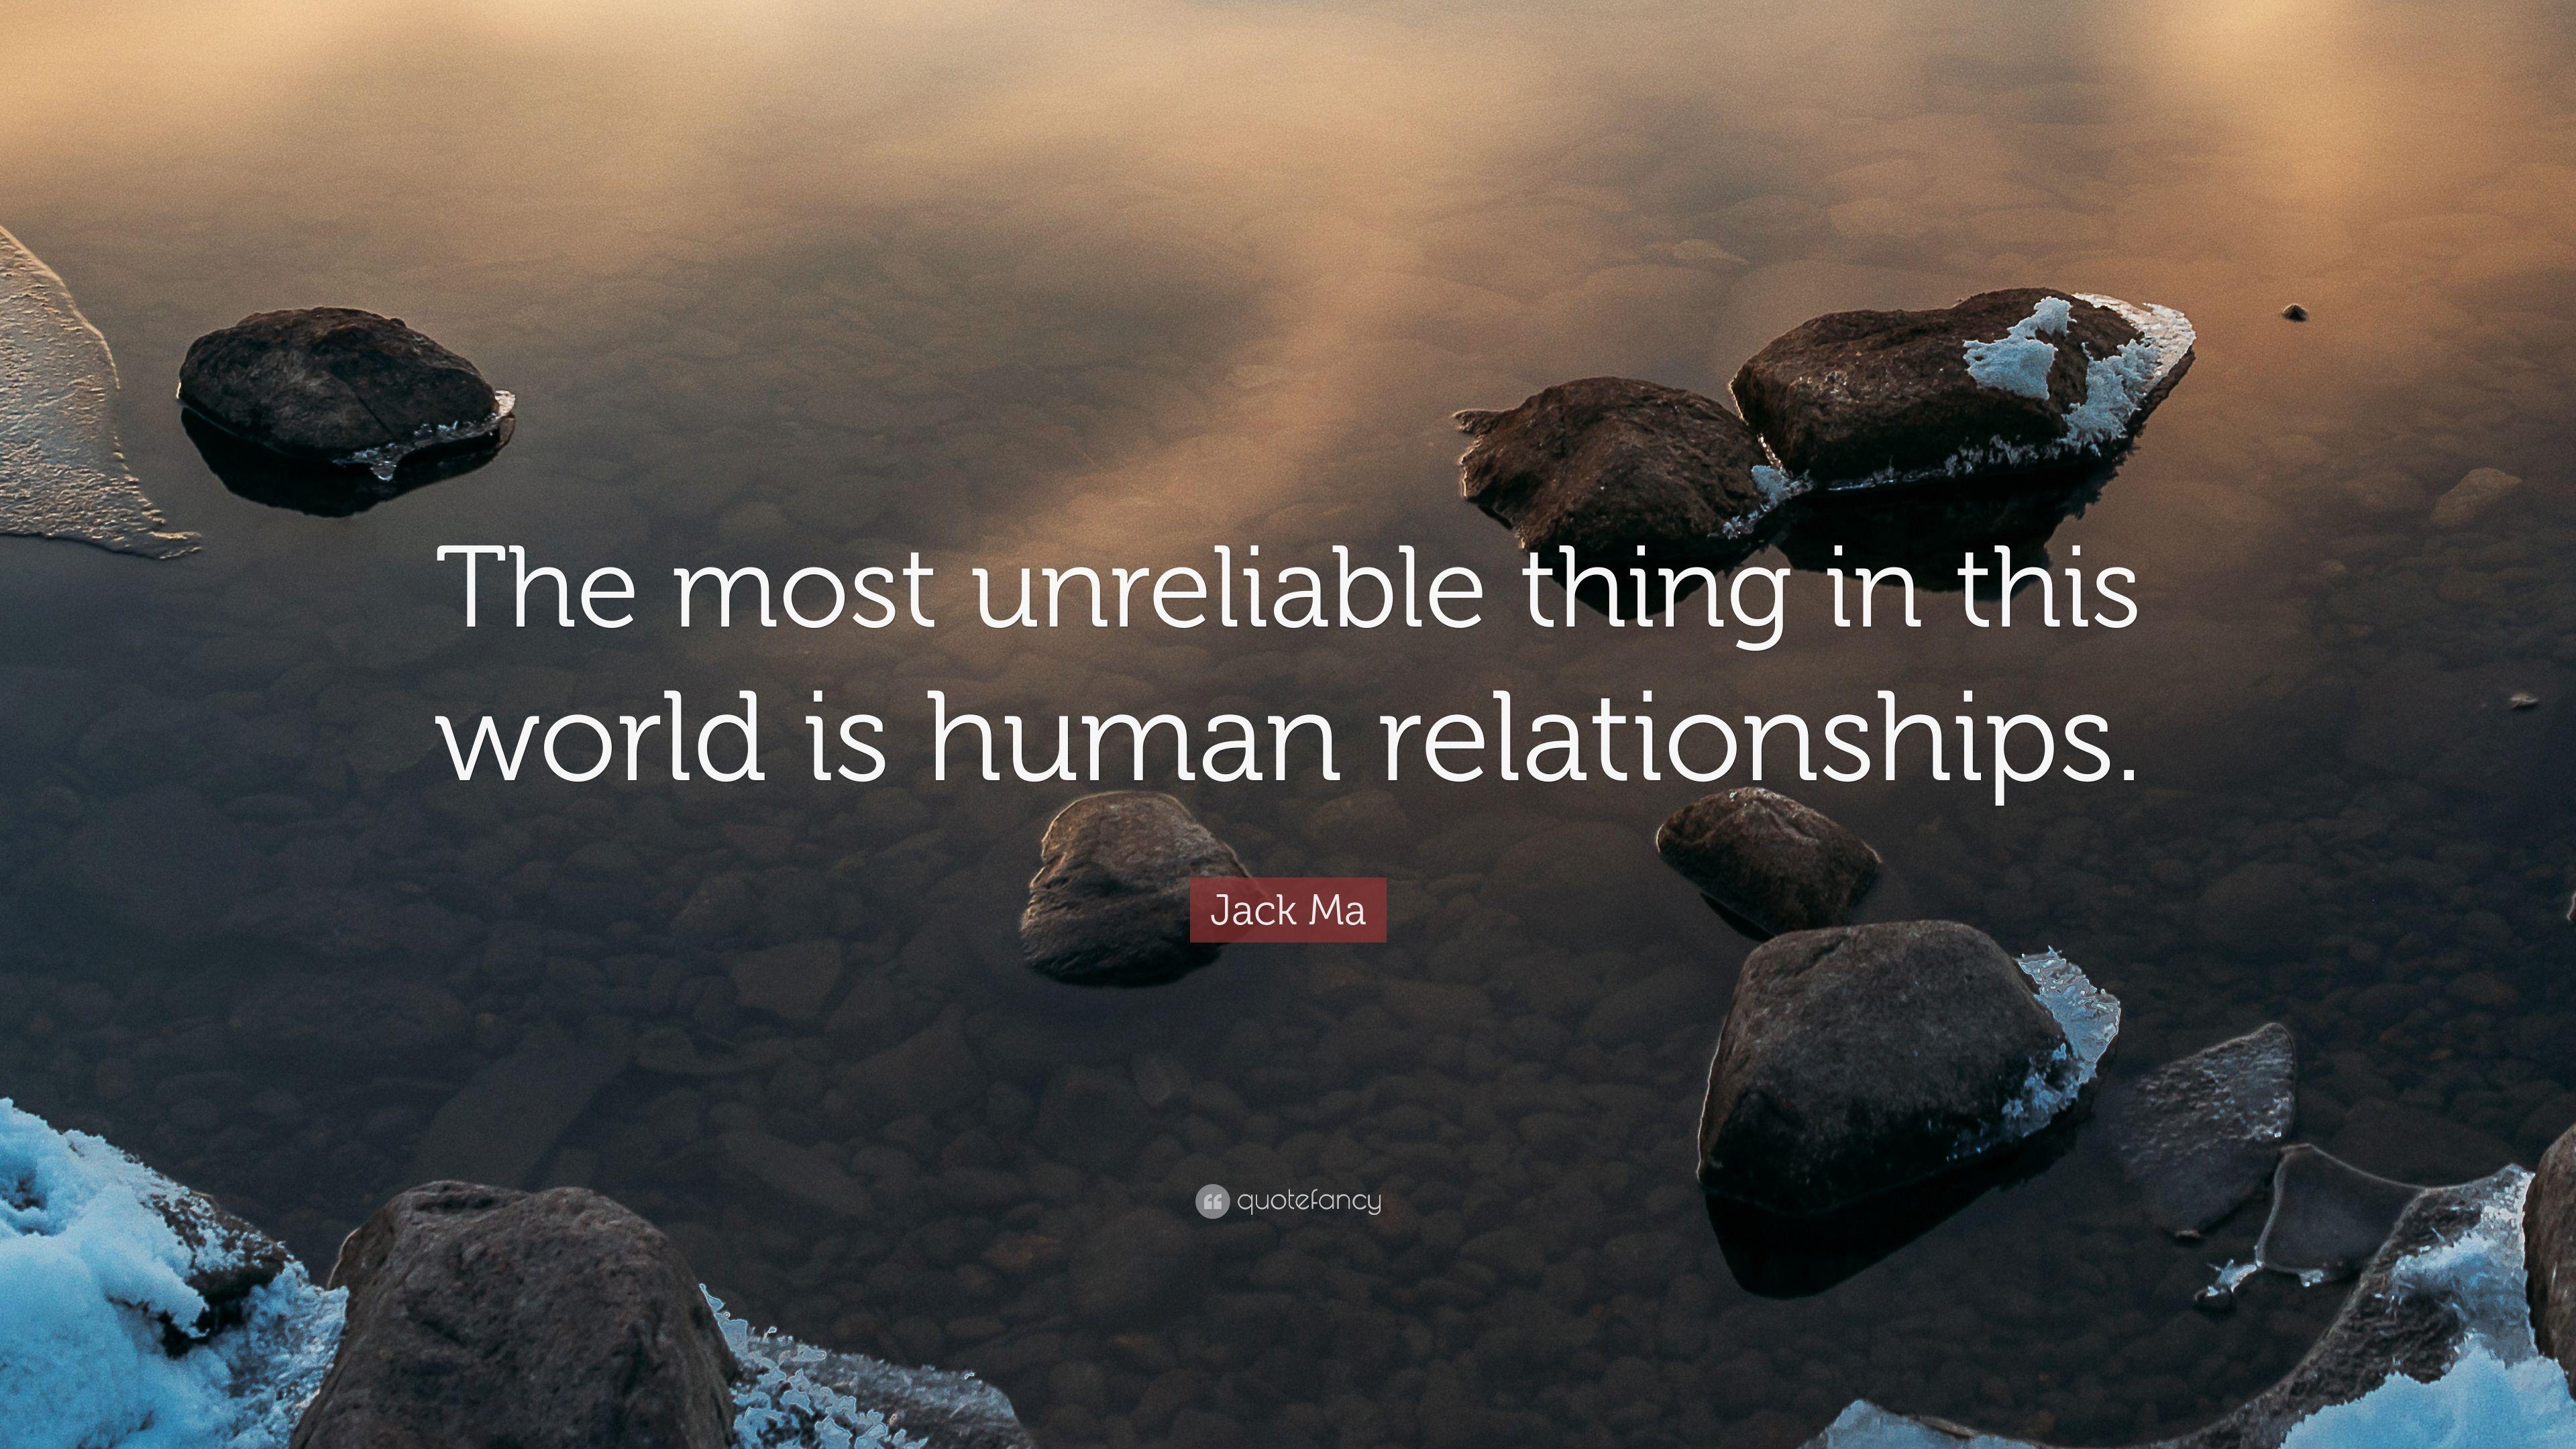 Jack Ma Quote: “The most unreliable thing in this world is human